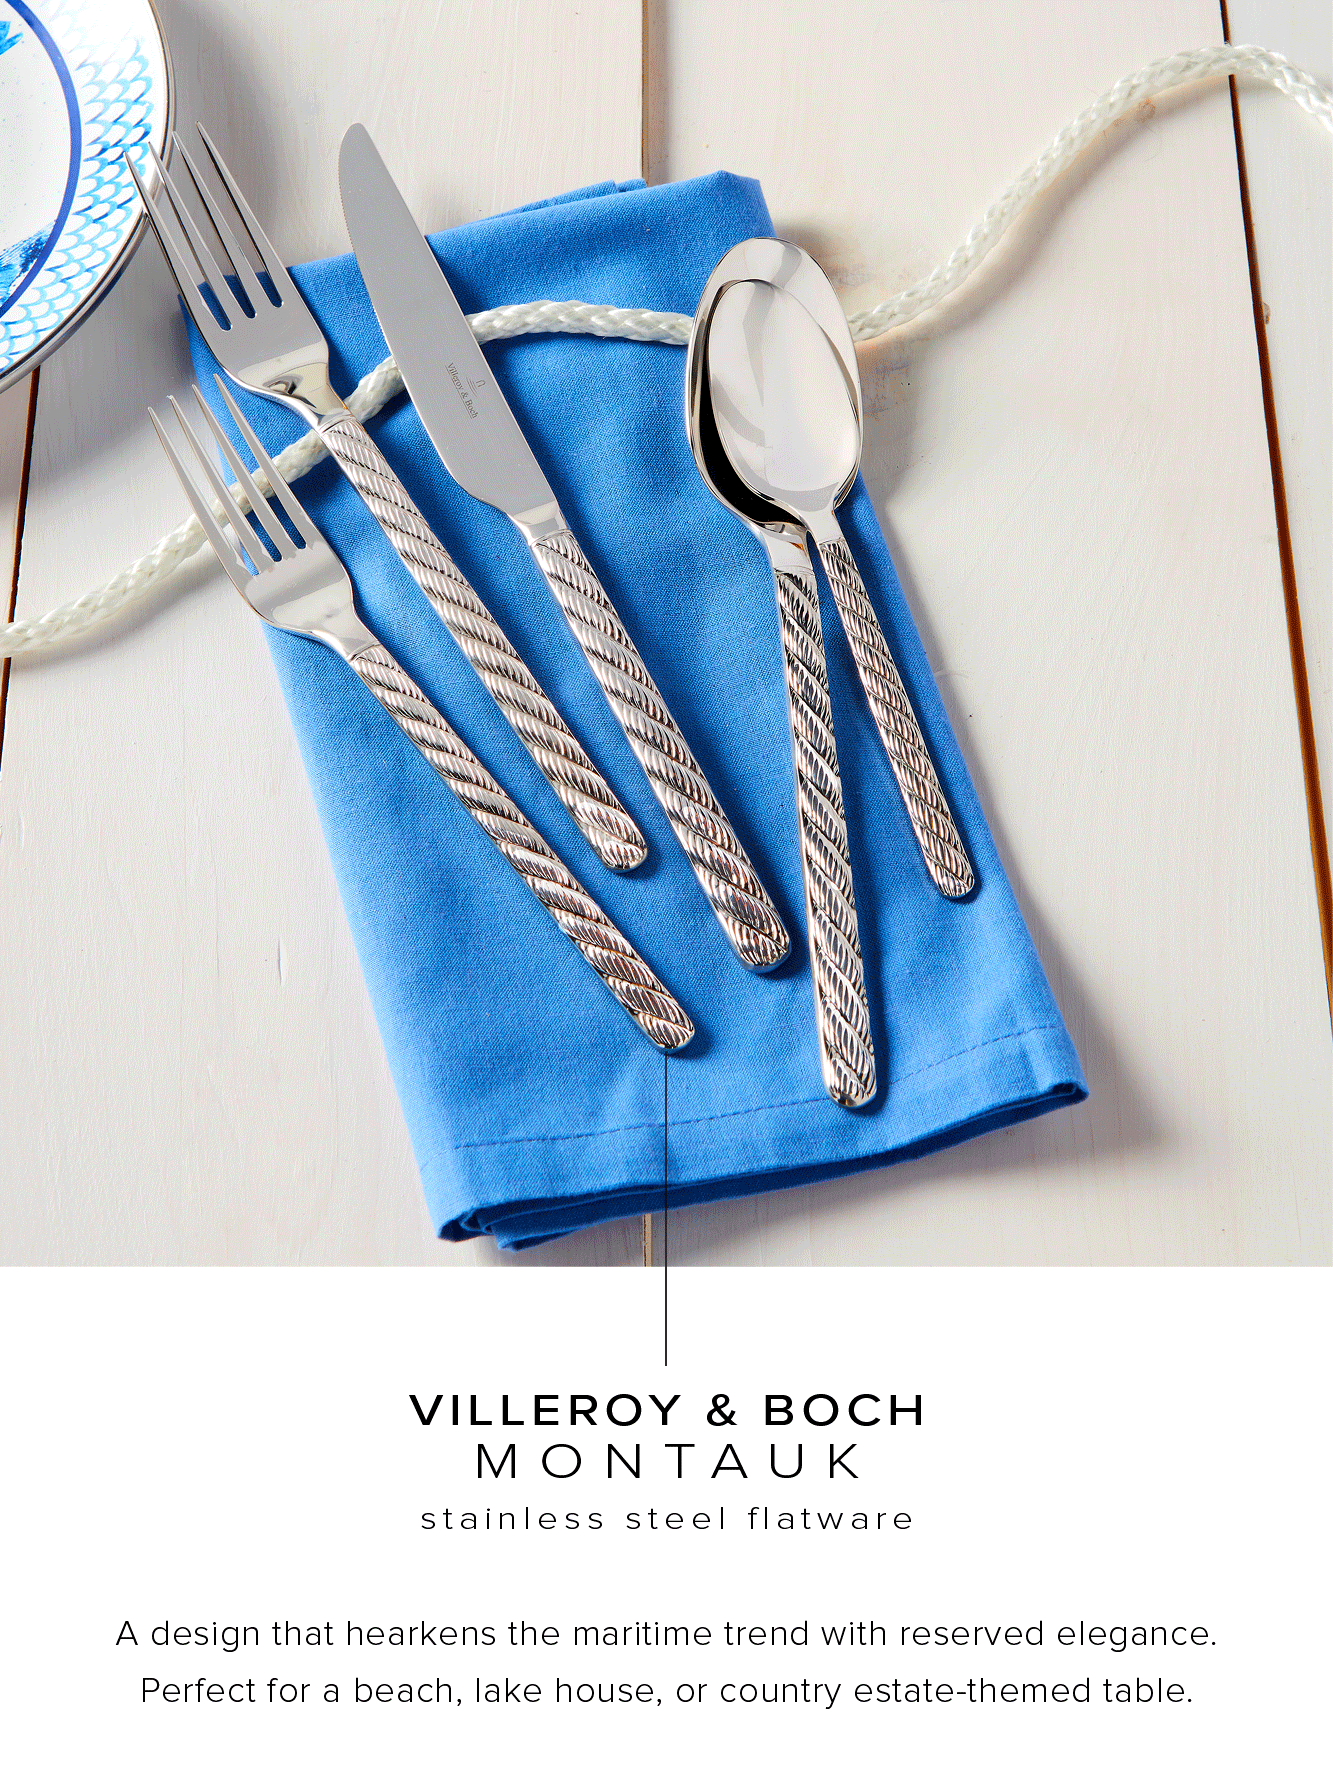  VILLEROY BOCH MONTAUK stainless steel flatware A design that hearkens the maritime trend with reserved elegance. Perfect for a beach, lake house, or country estate-themed table. 